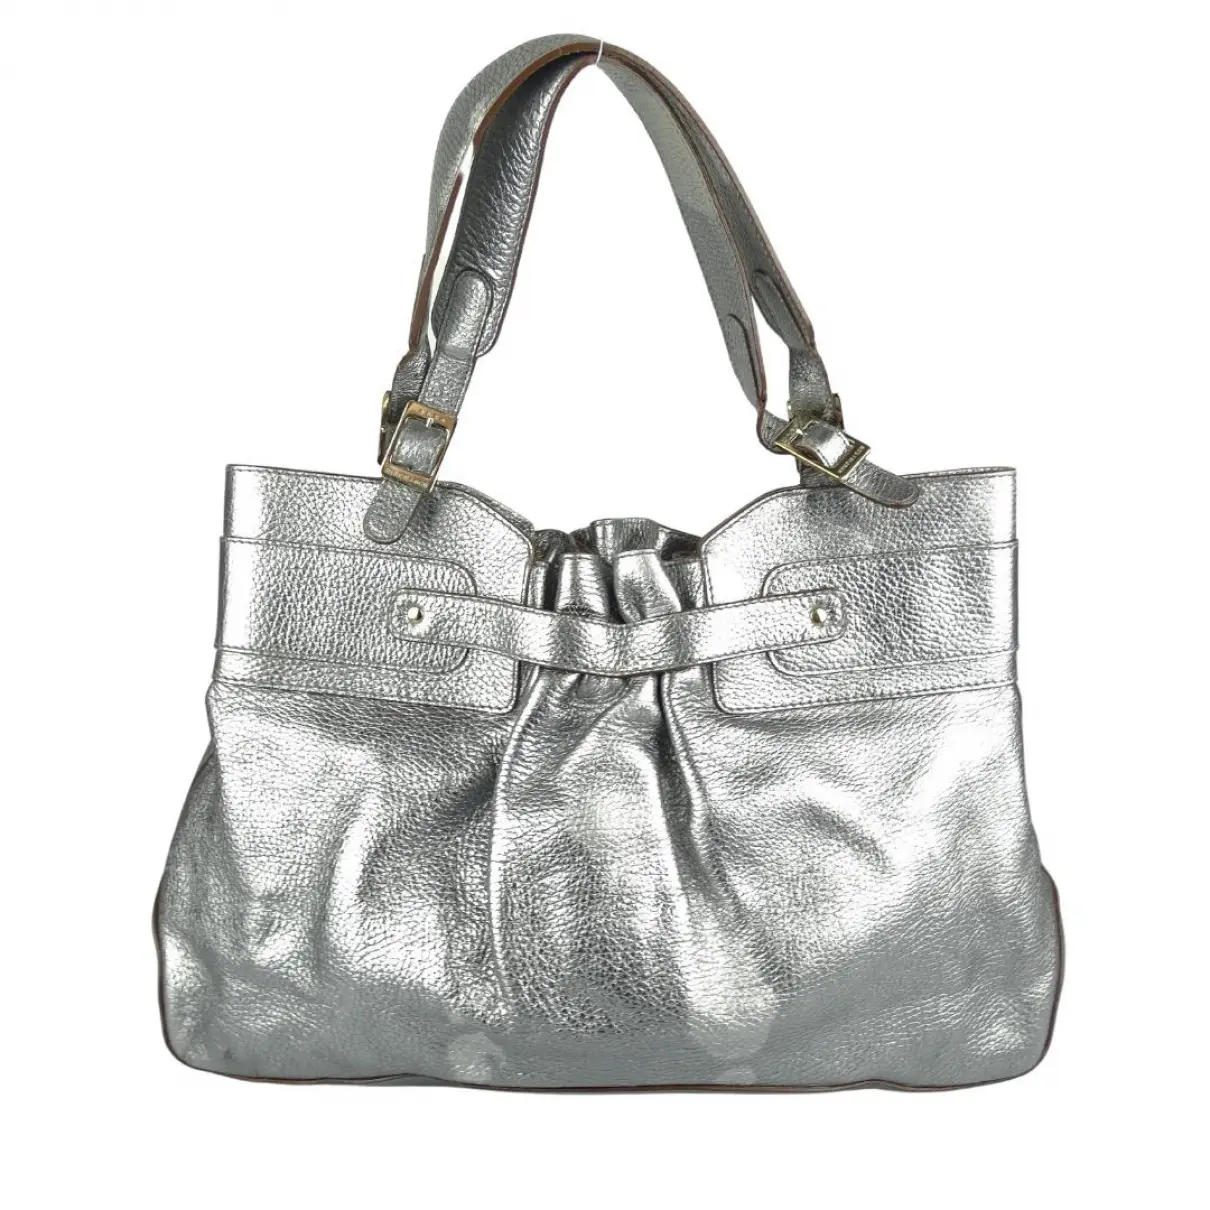 Buy Anya Hindmarch Leather tote online